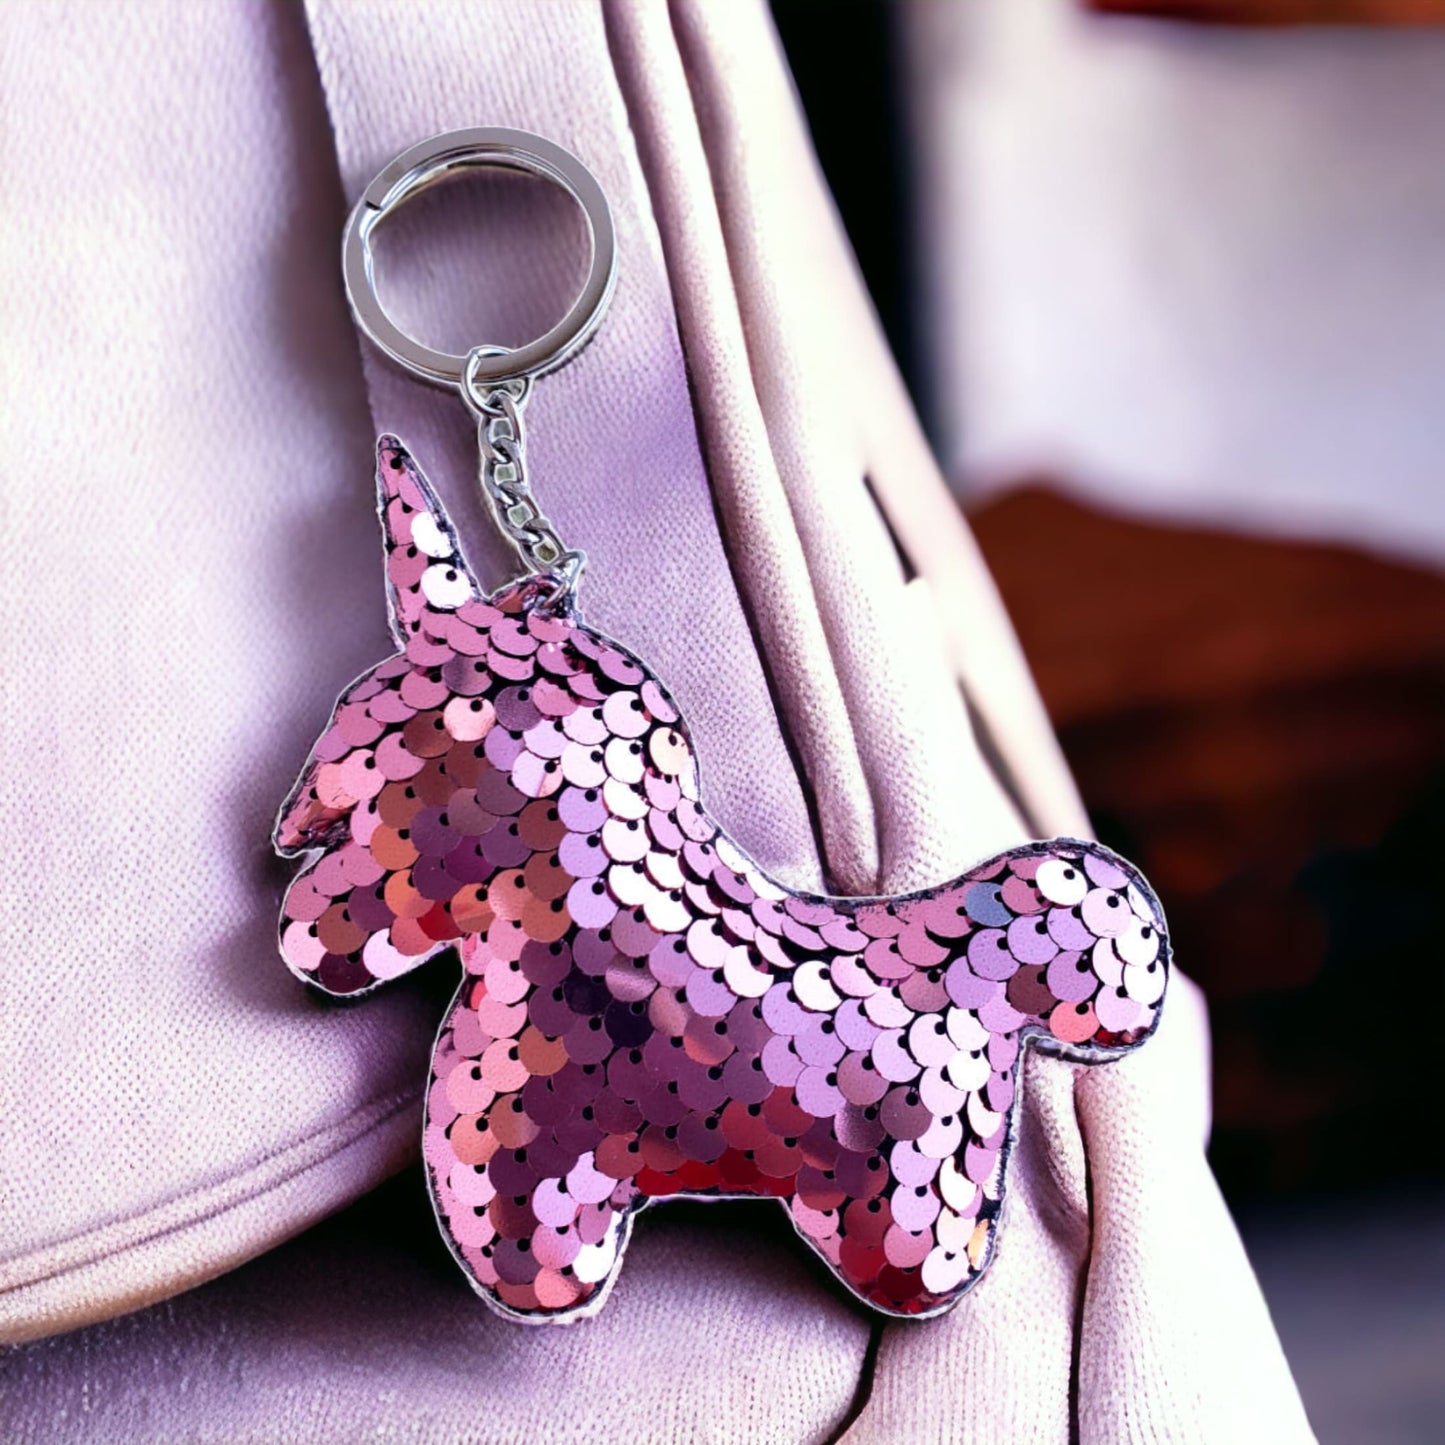 Sequin Unicorn Bag Charm Keychain from Confetti Kitty, Only 2.99